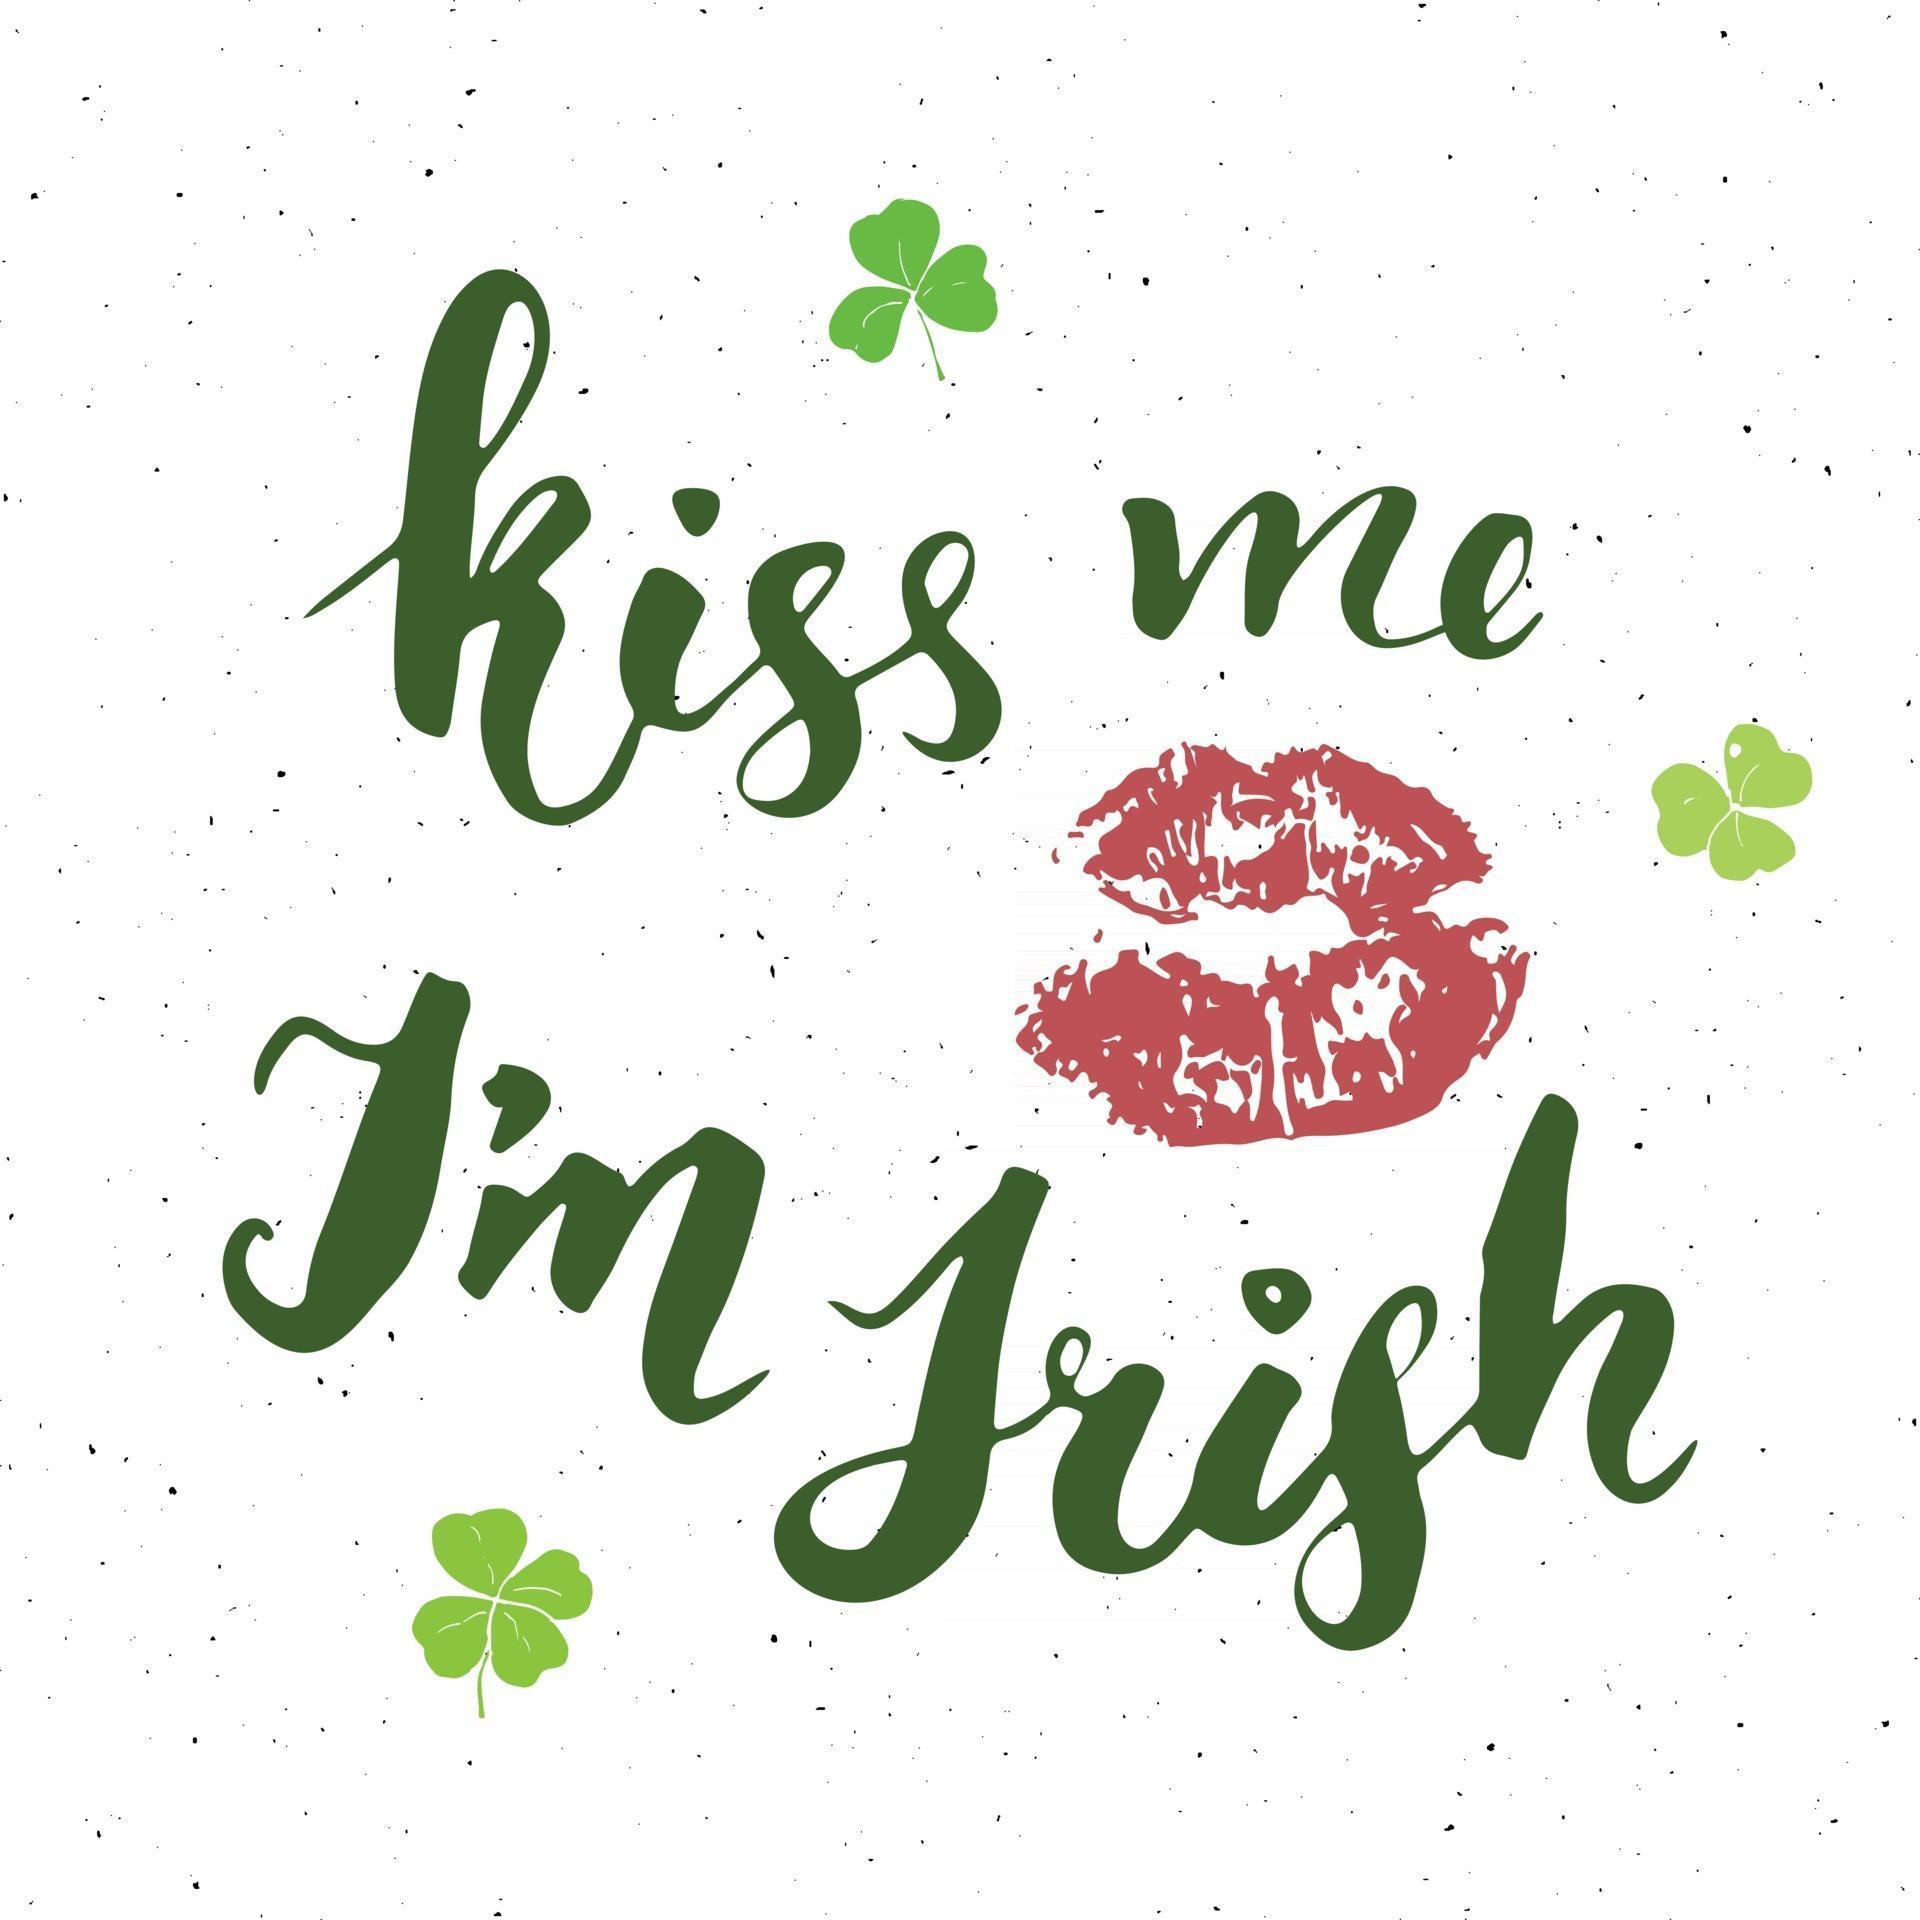 Kiss me, I'm irish. St Patrick's Day greeting card Hand lettering with